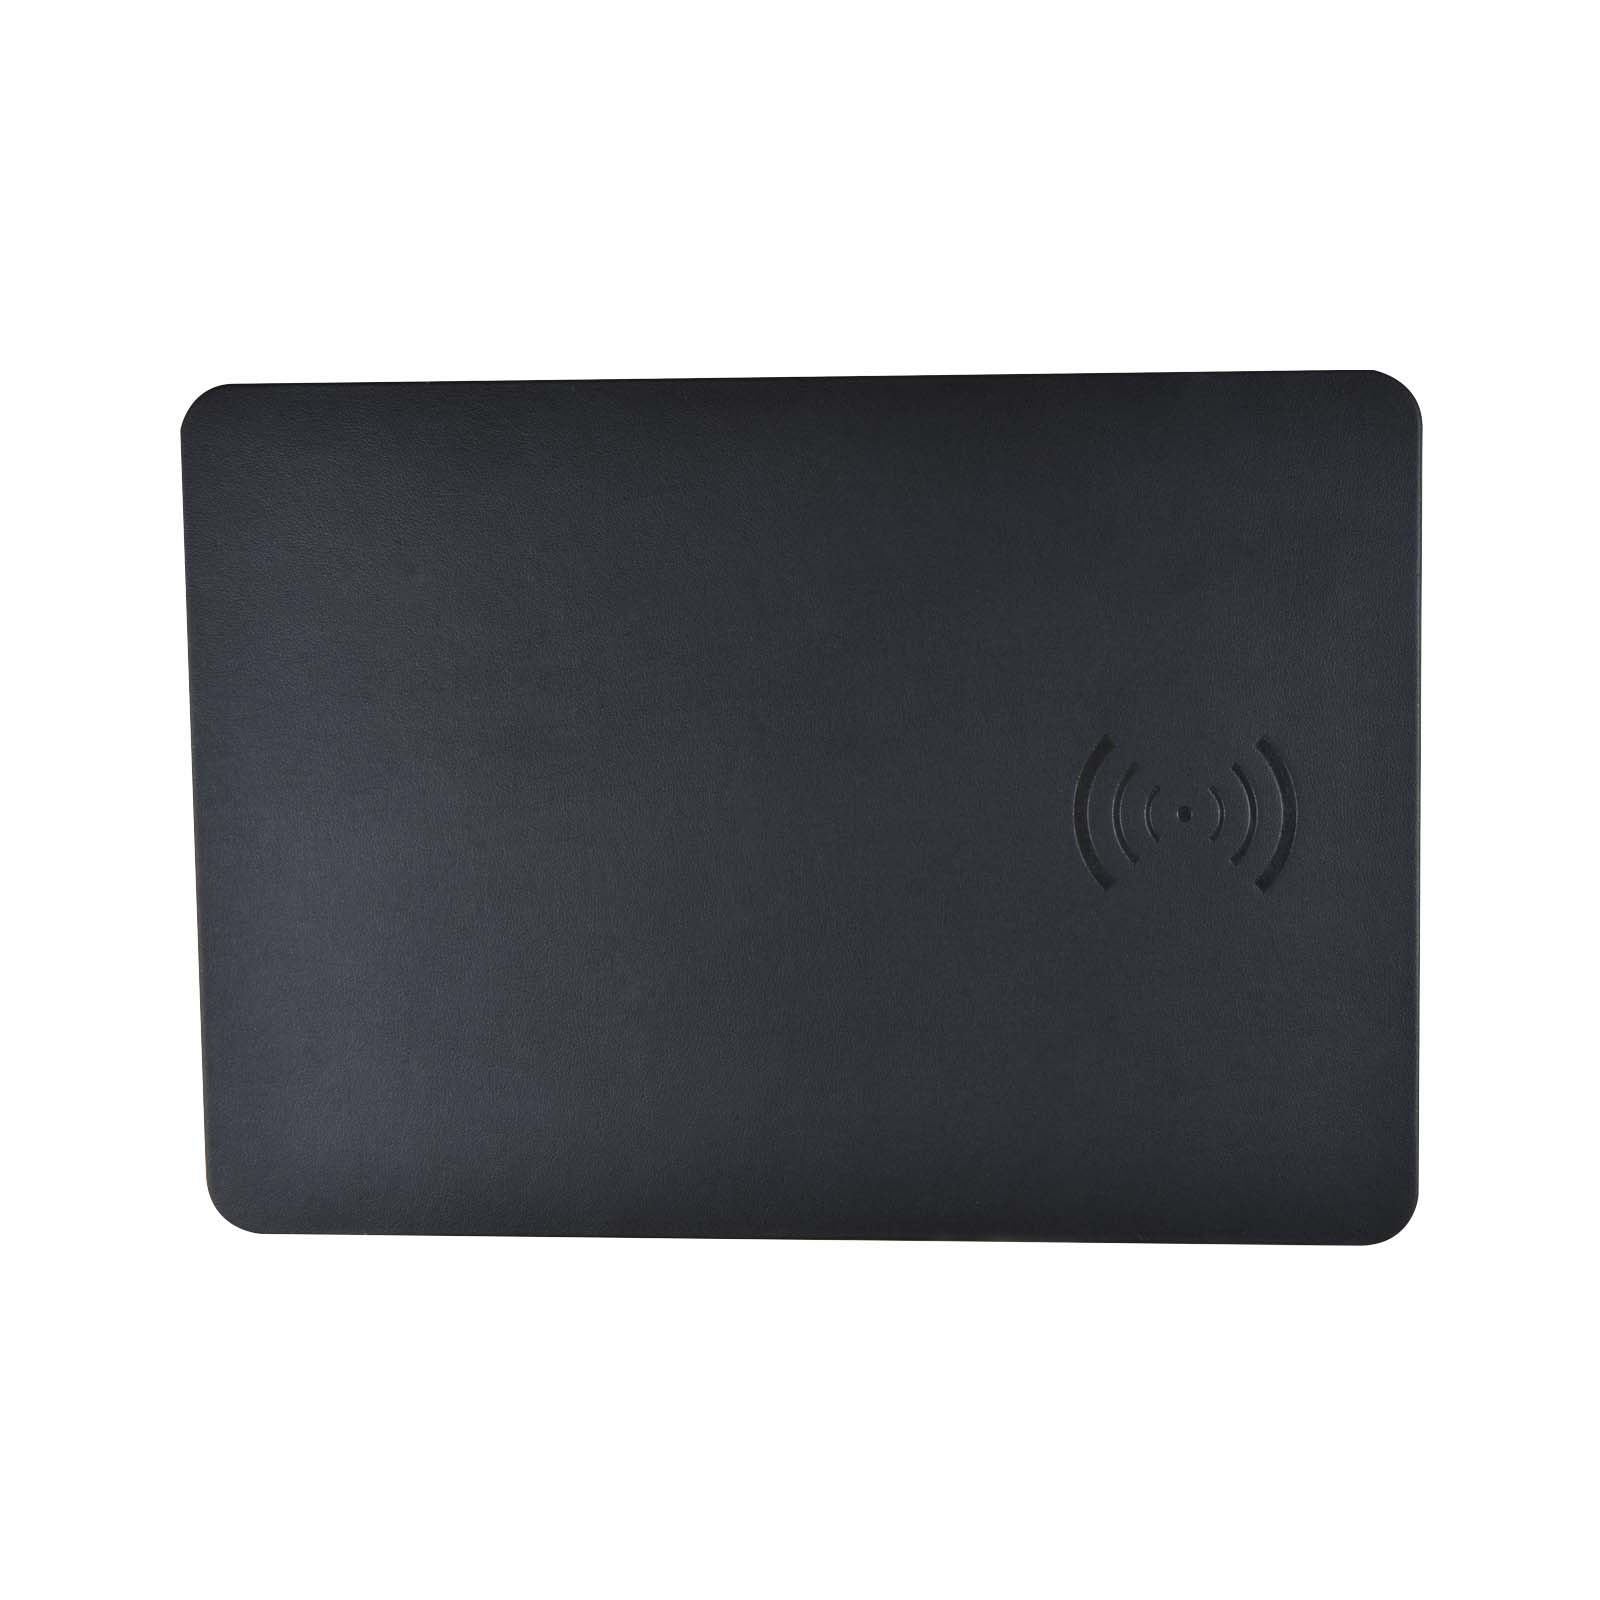 LL0217-Hover-Wireless-Charger-Mouse-Pad-2